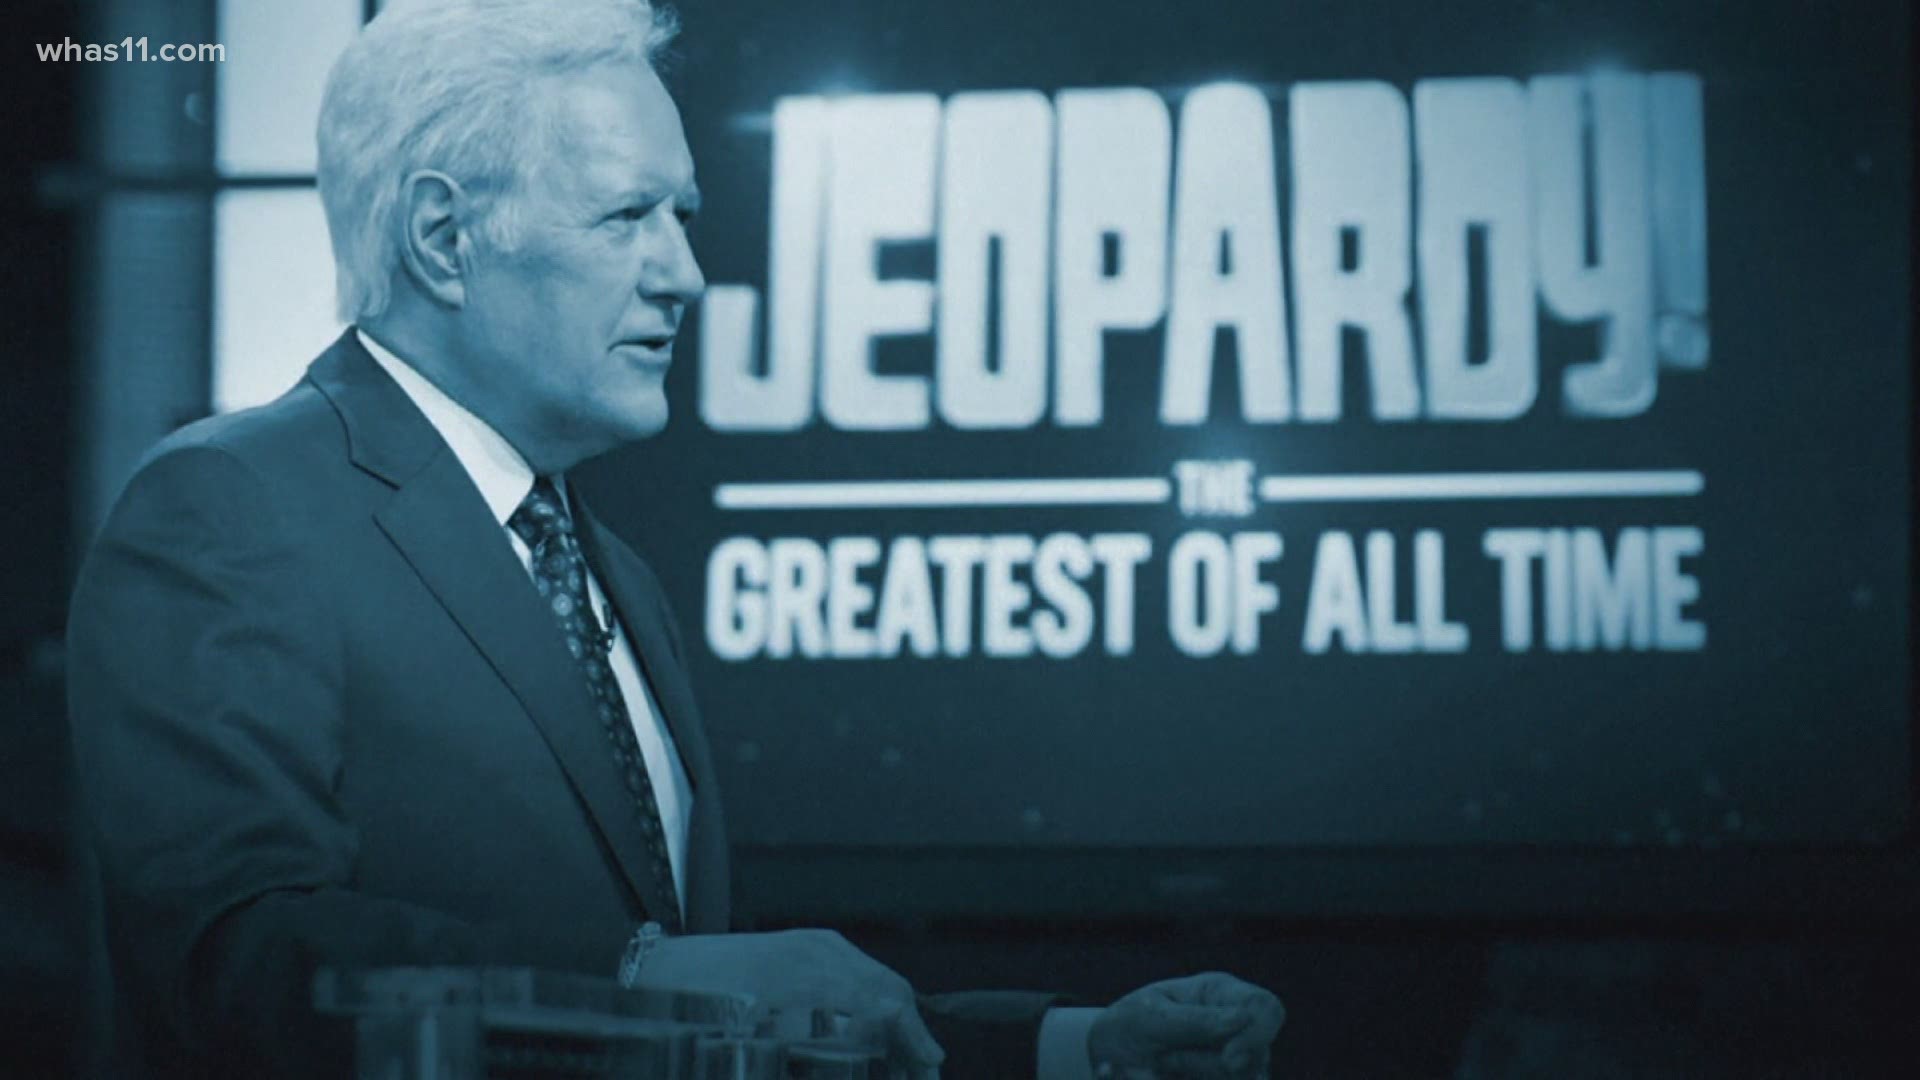 Alex Trebek's final episode is airing Friday, Jan. 8, will conclude with a tribute to him.